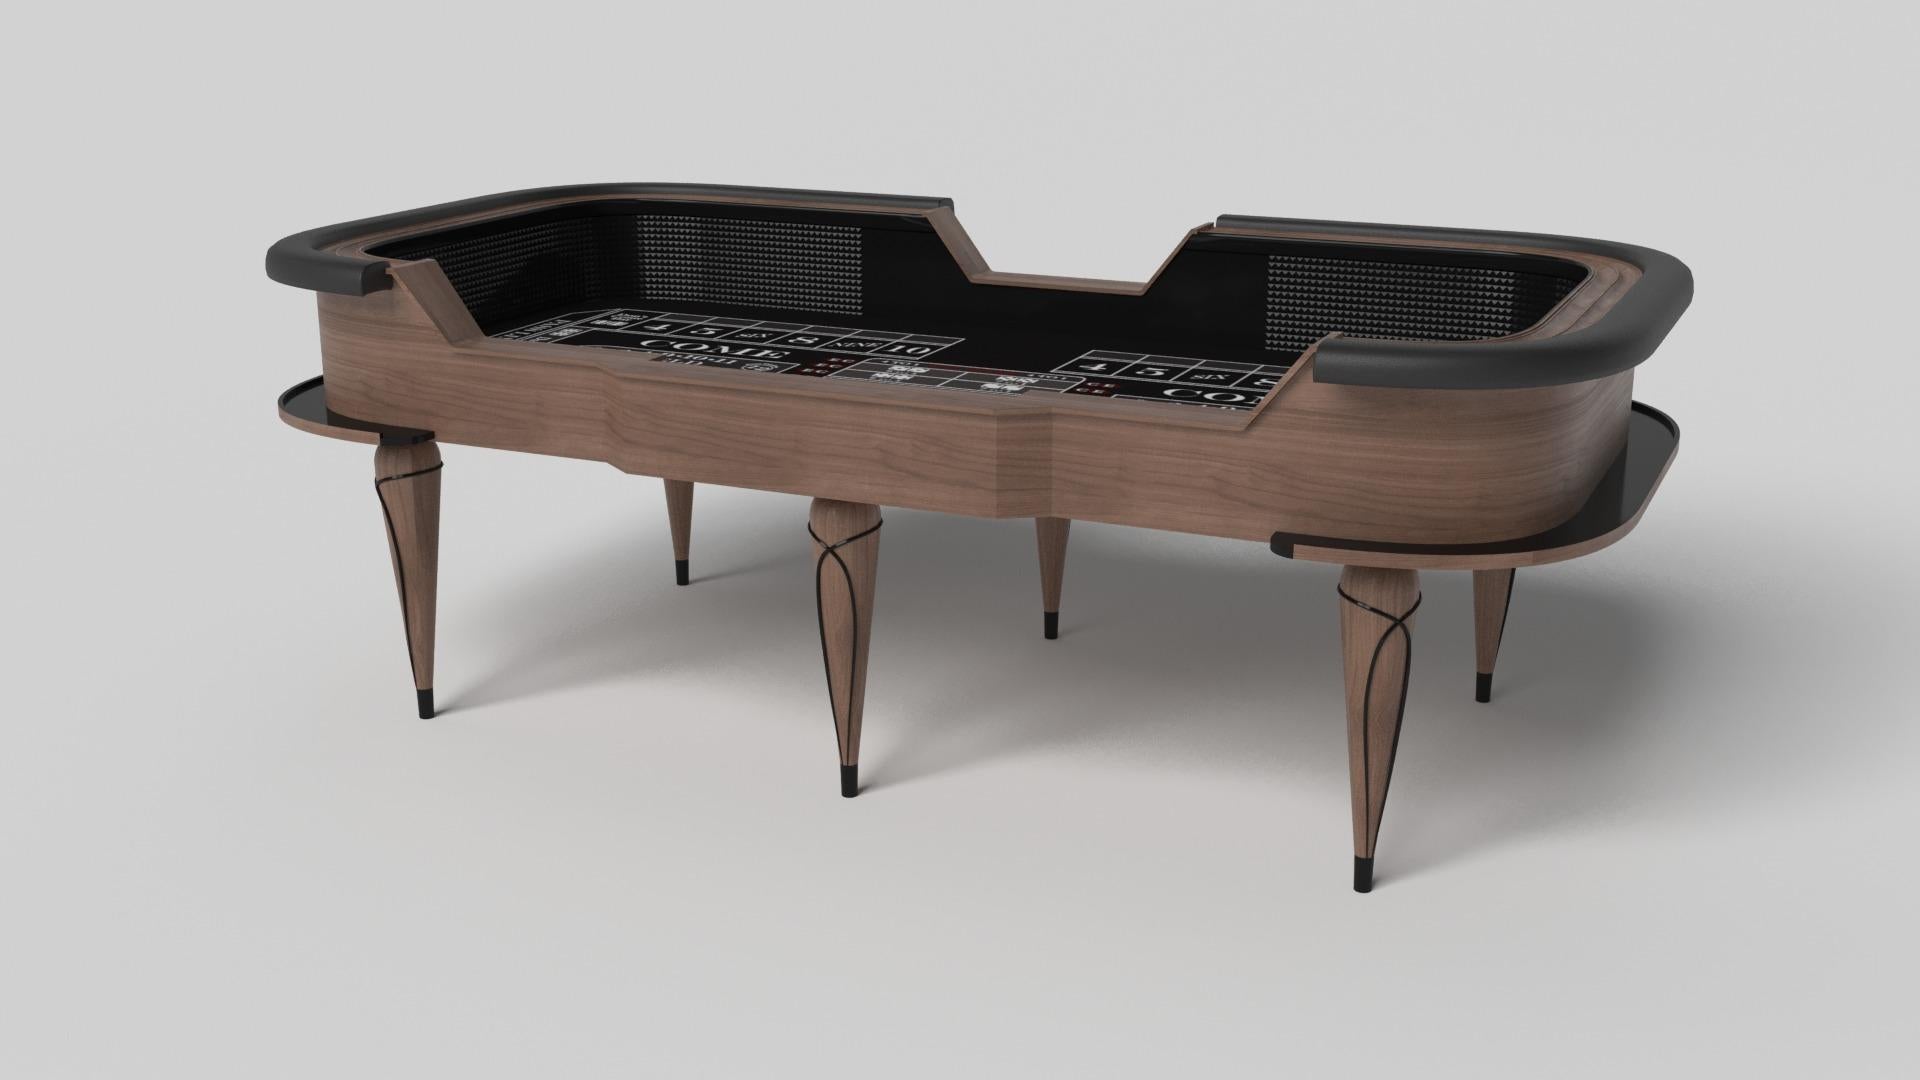 Champagne gold accents add undeniable elegance to this luxury craps table. Offering superior playability and uncompromised style, this design features hand carved details, decorative metal elements, and metal sabots at the bottom of each leg. The